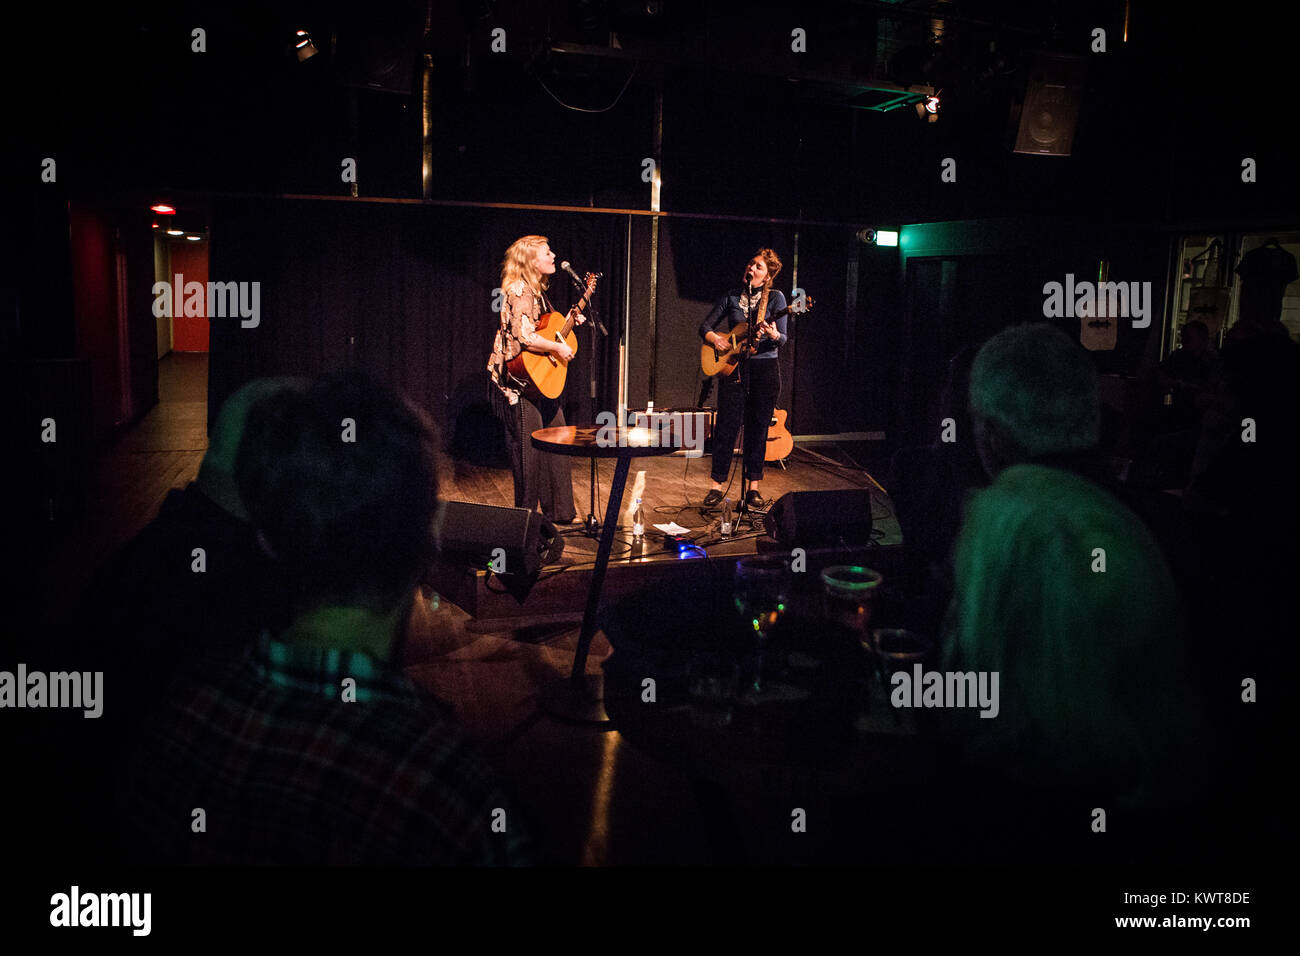 Denmark, Copenhagen - October 20, 2017. The Swedish folk duo Good Harvest performs a live concert at Ideal Bar in Copenhagen. The duo consists of the two musicians and singers Hanna Enlof and Ylva Eriksson. (Photo credit: Gonzales Photo - Christian Hjorth). Stock Photo